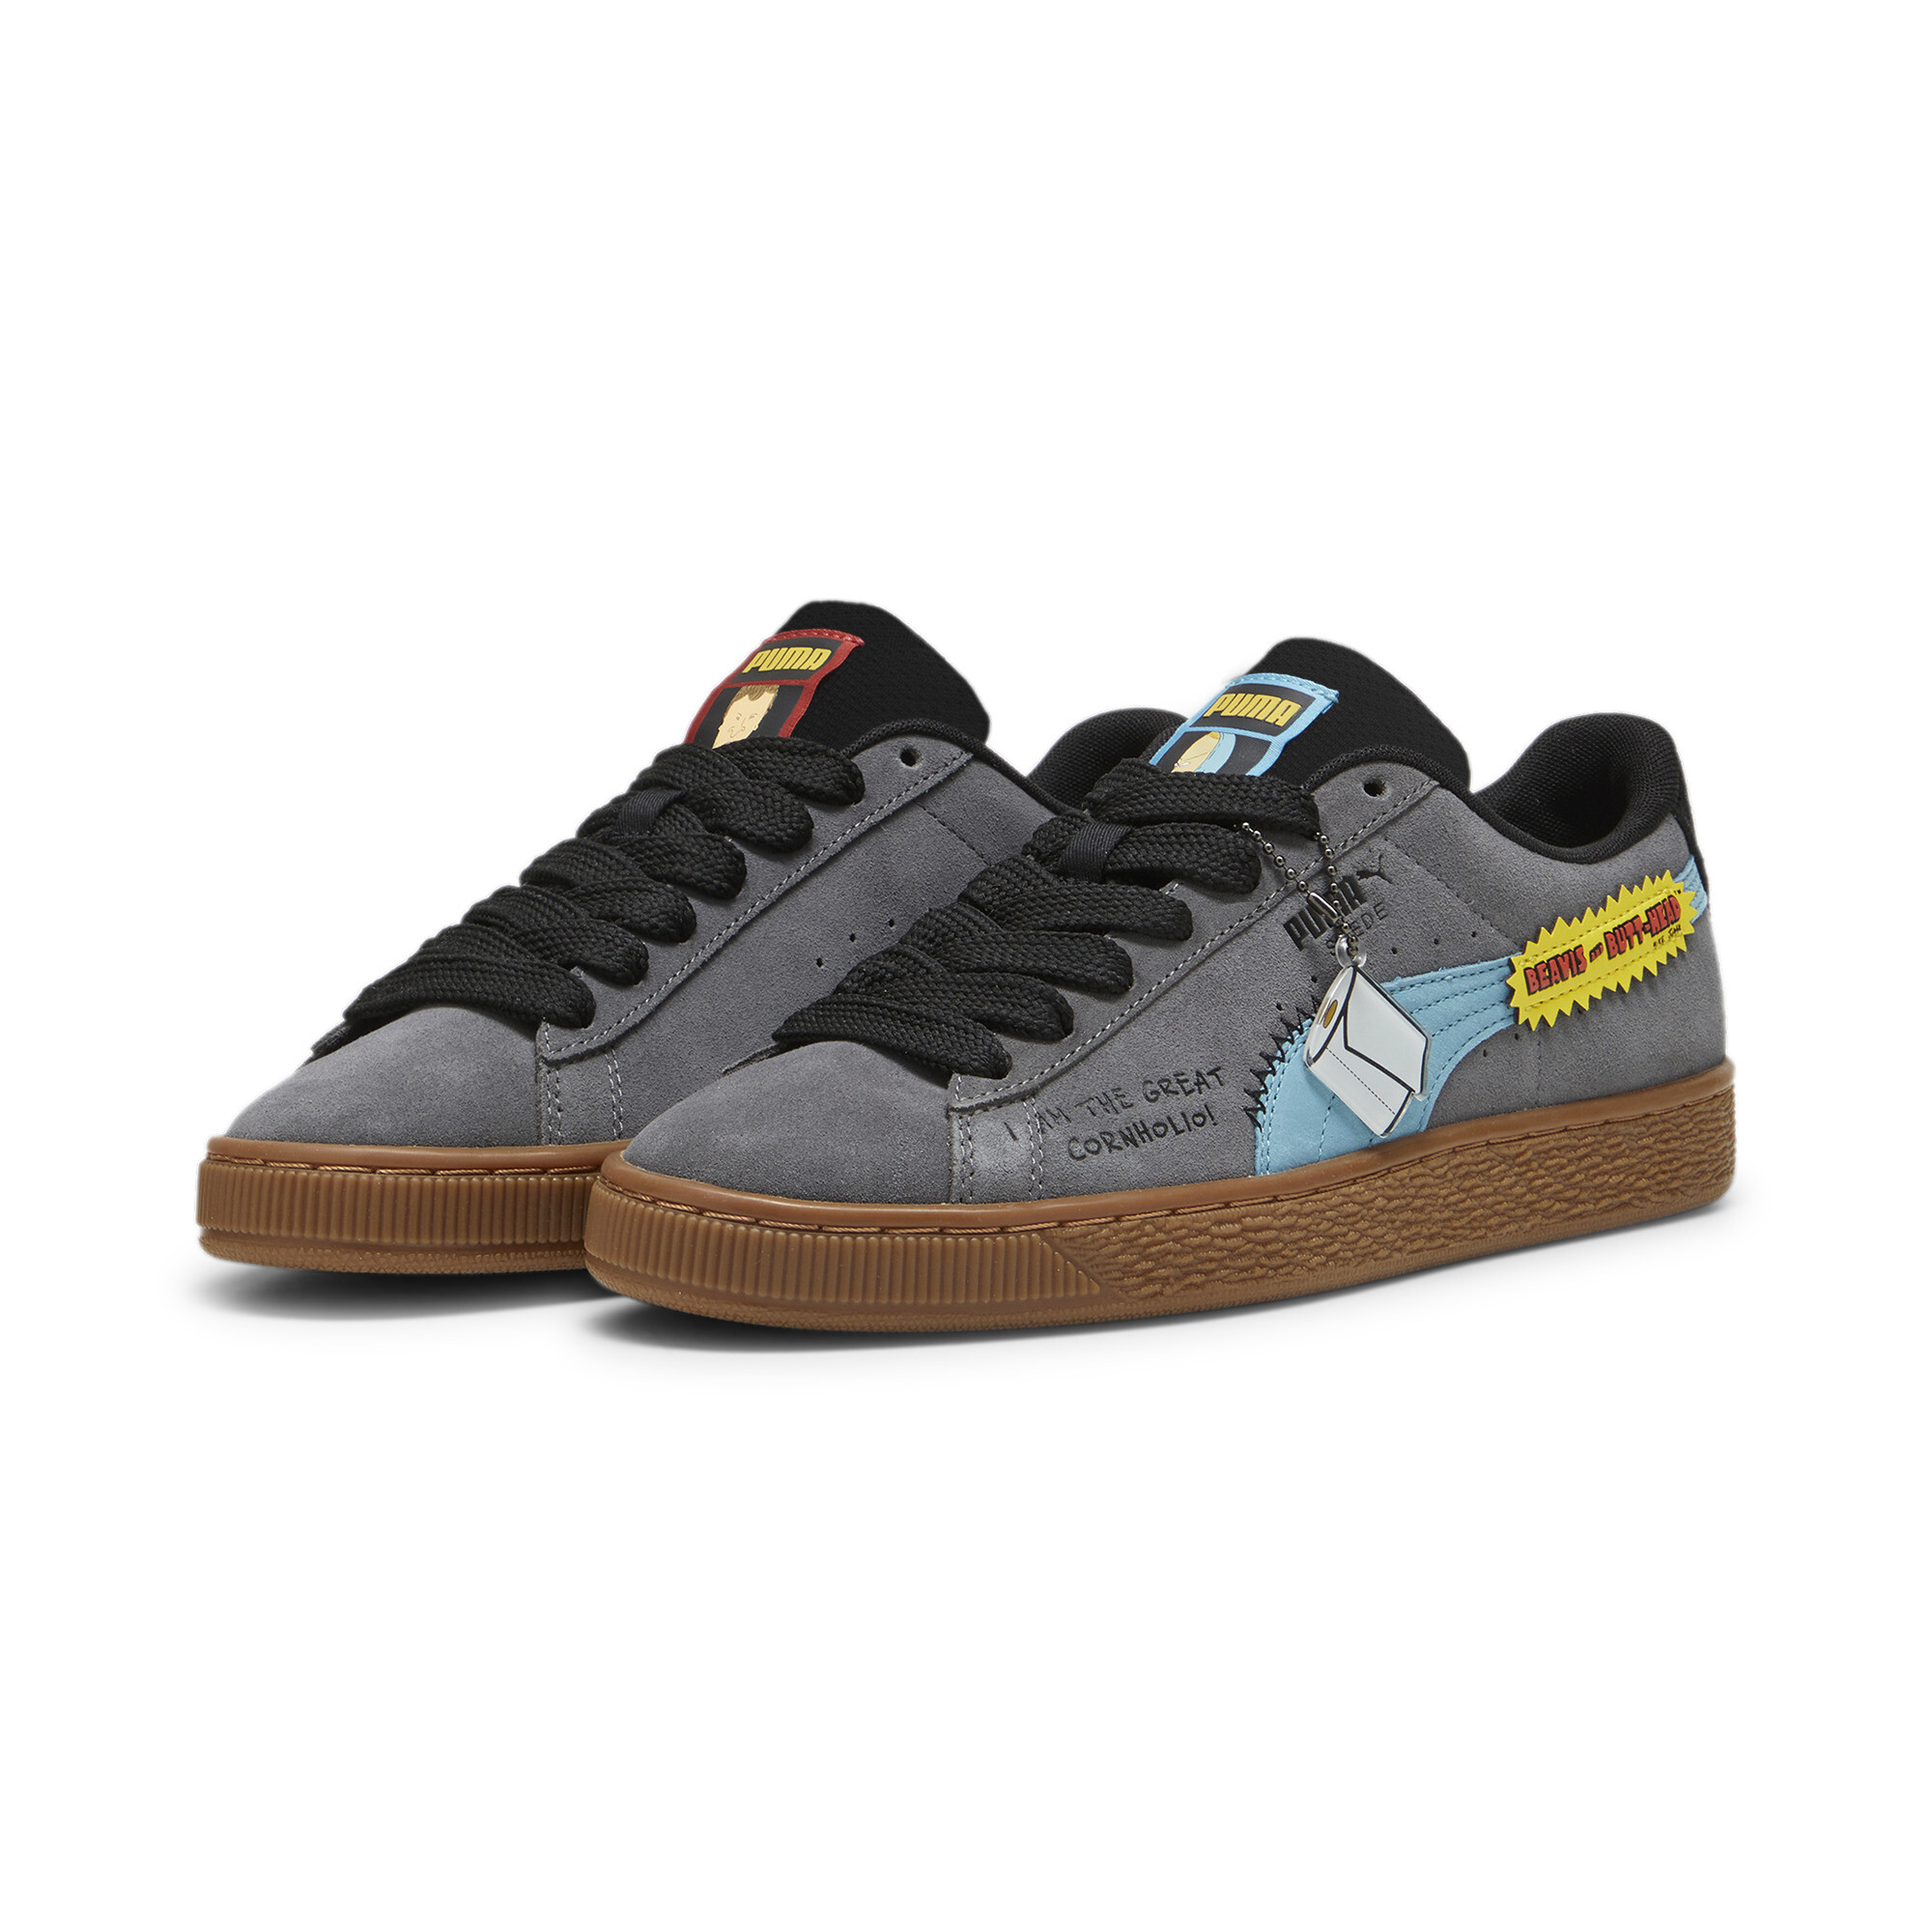 Kids' PUMA X BEAVIS AND BUTTHEAD Suede Sneakers In Gray, Size EU 37.5